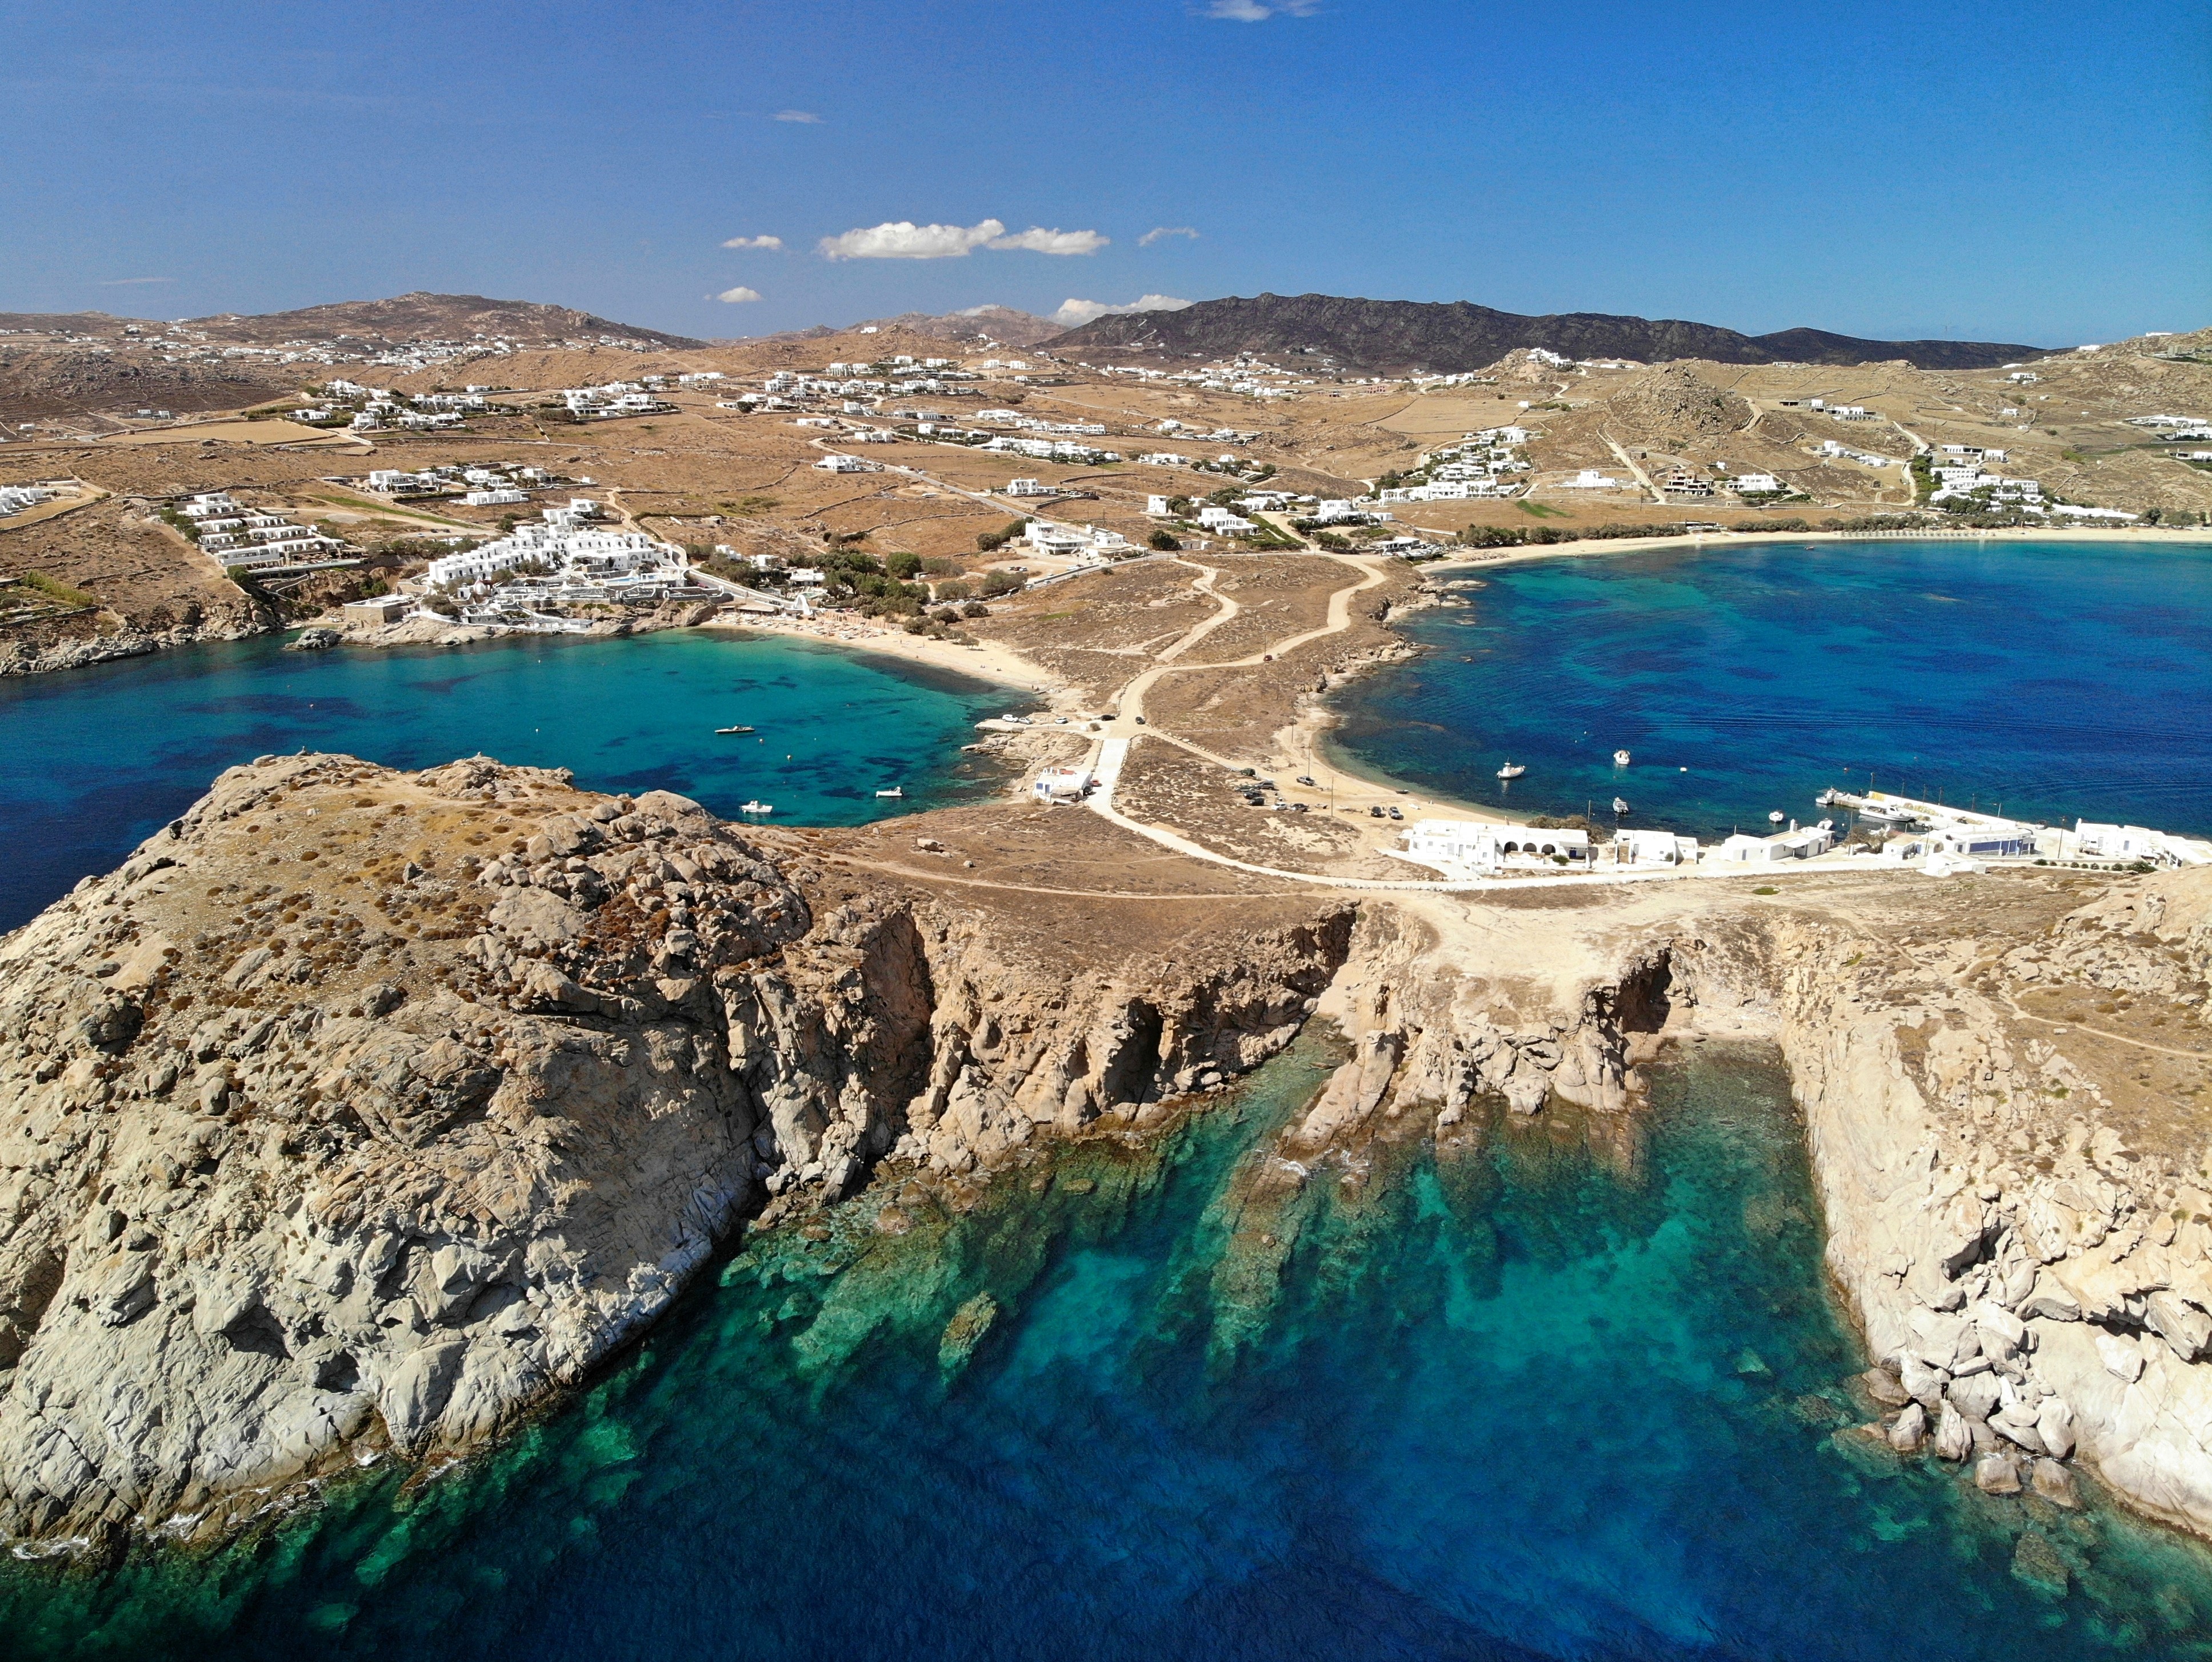 Drone picture, on the left is Agia Anna beach and on the right is Kalafati beach